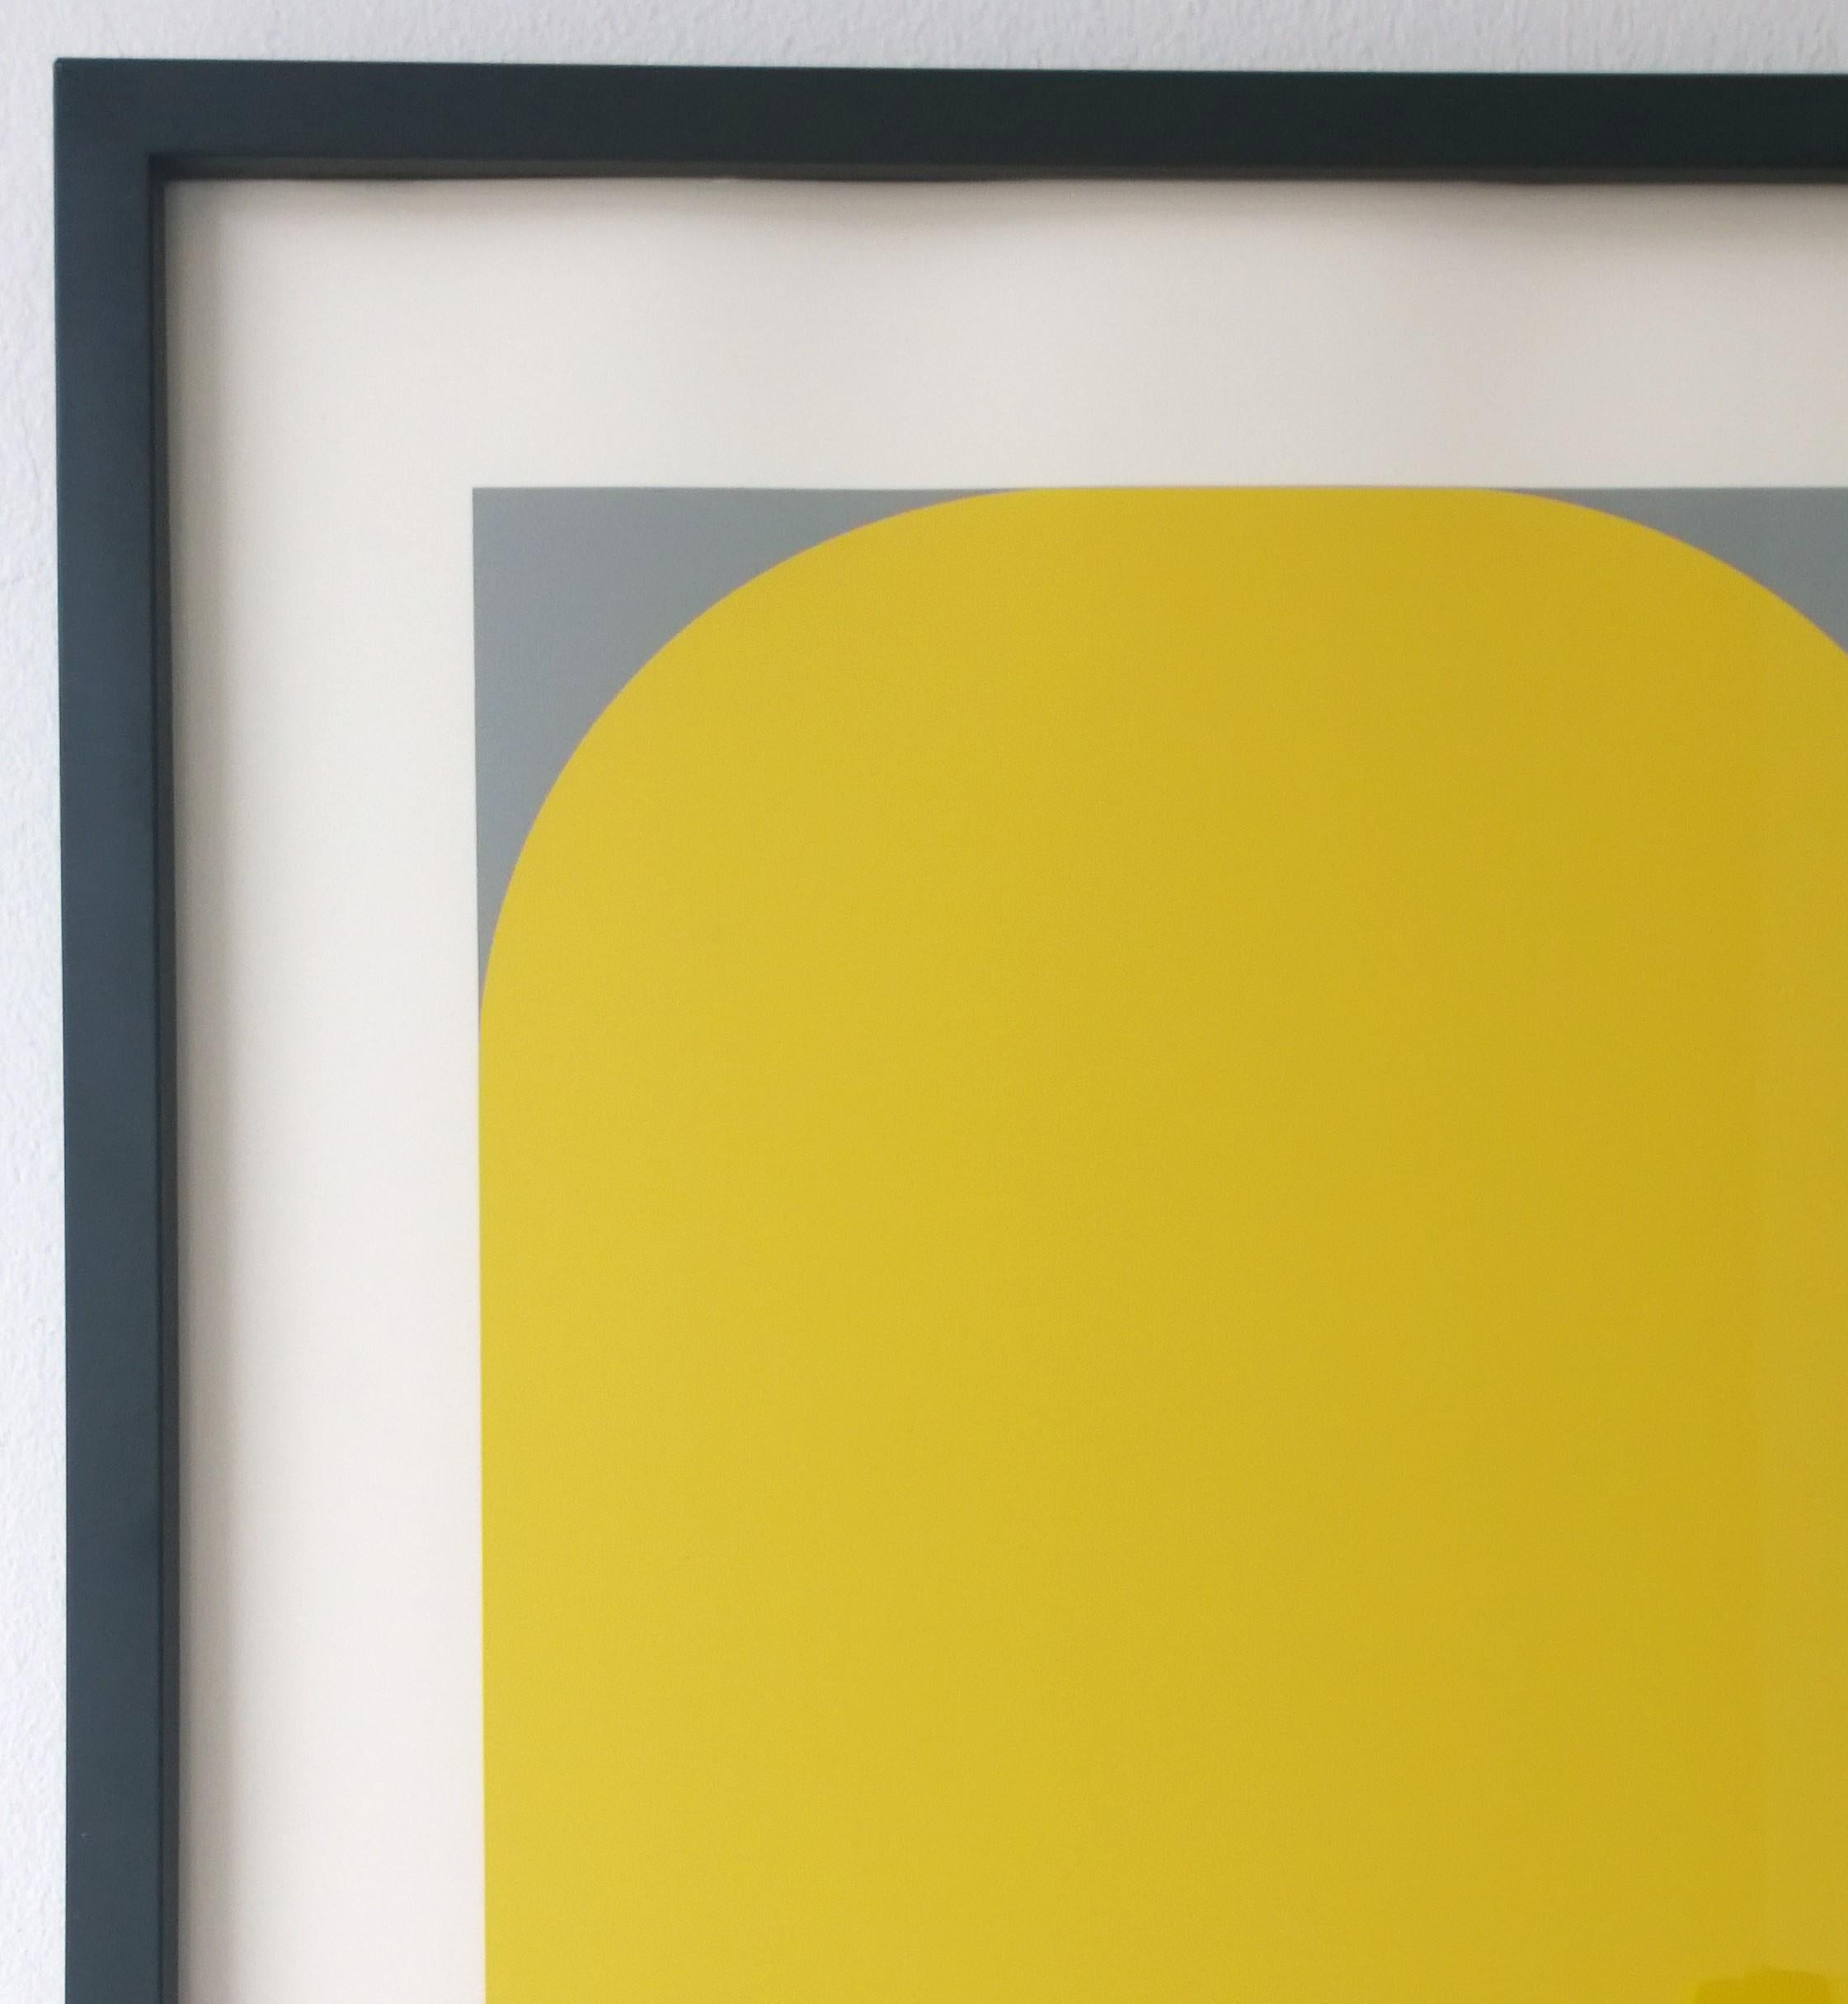 Offered is a framed Mid-Century Modern abstract screen print by Kaspar Thomas Lenk, 